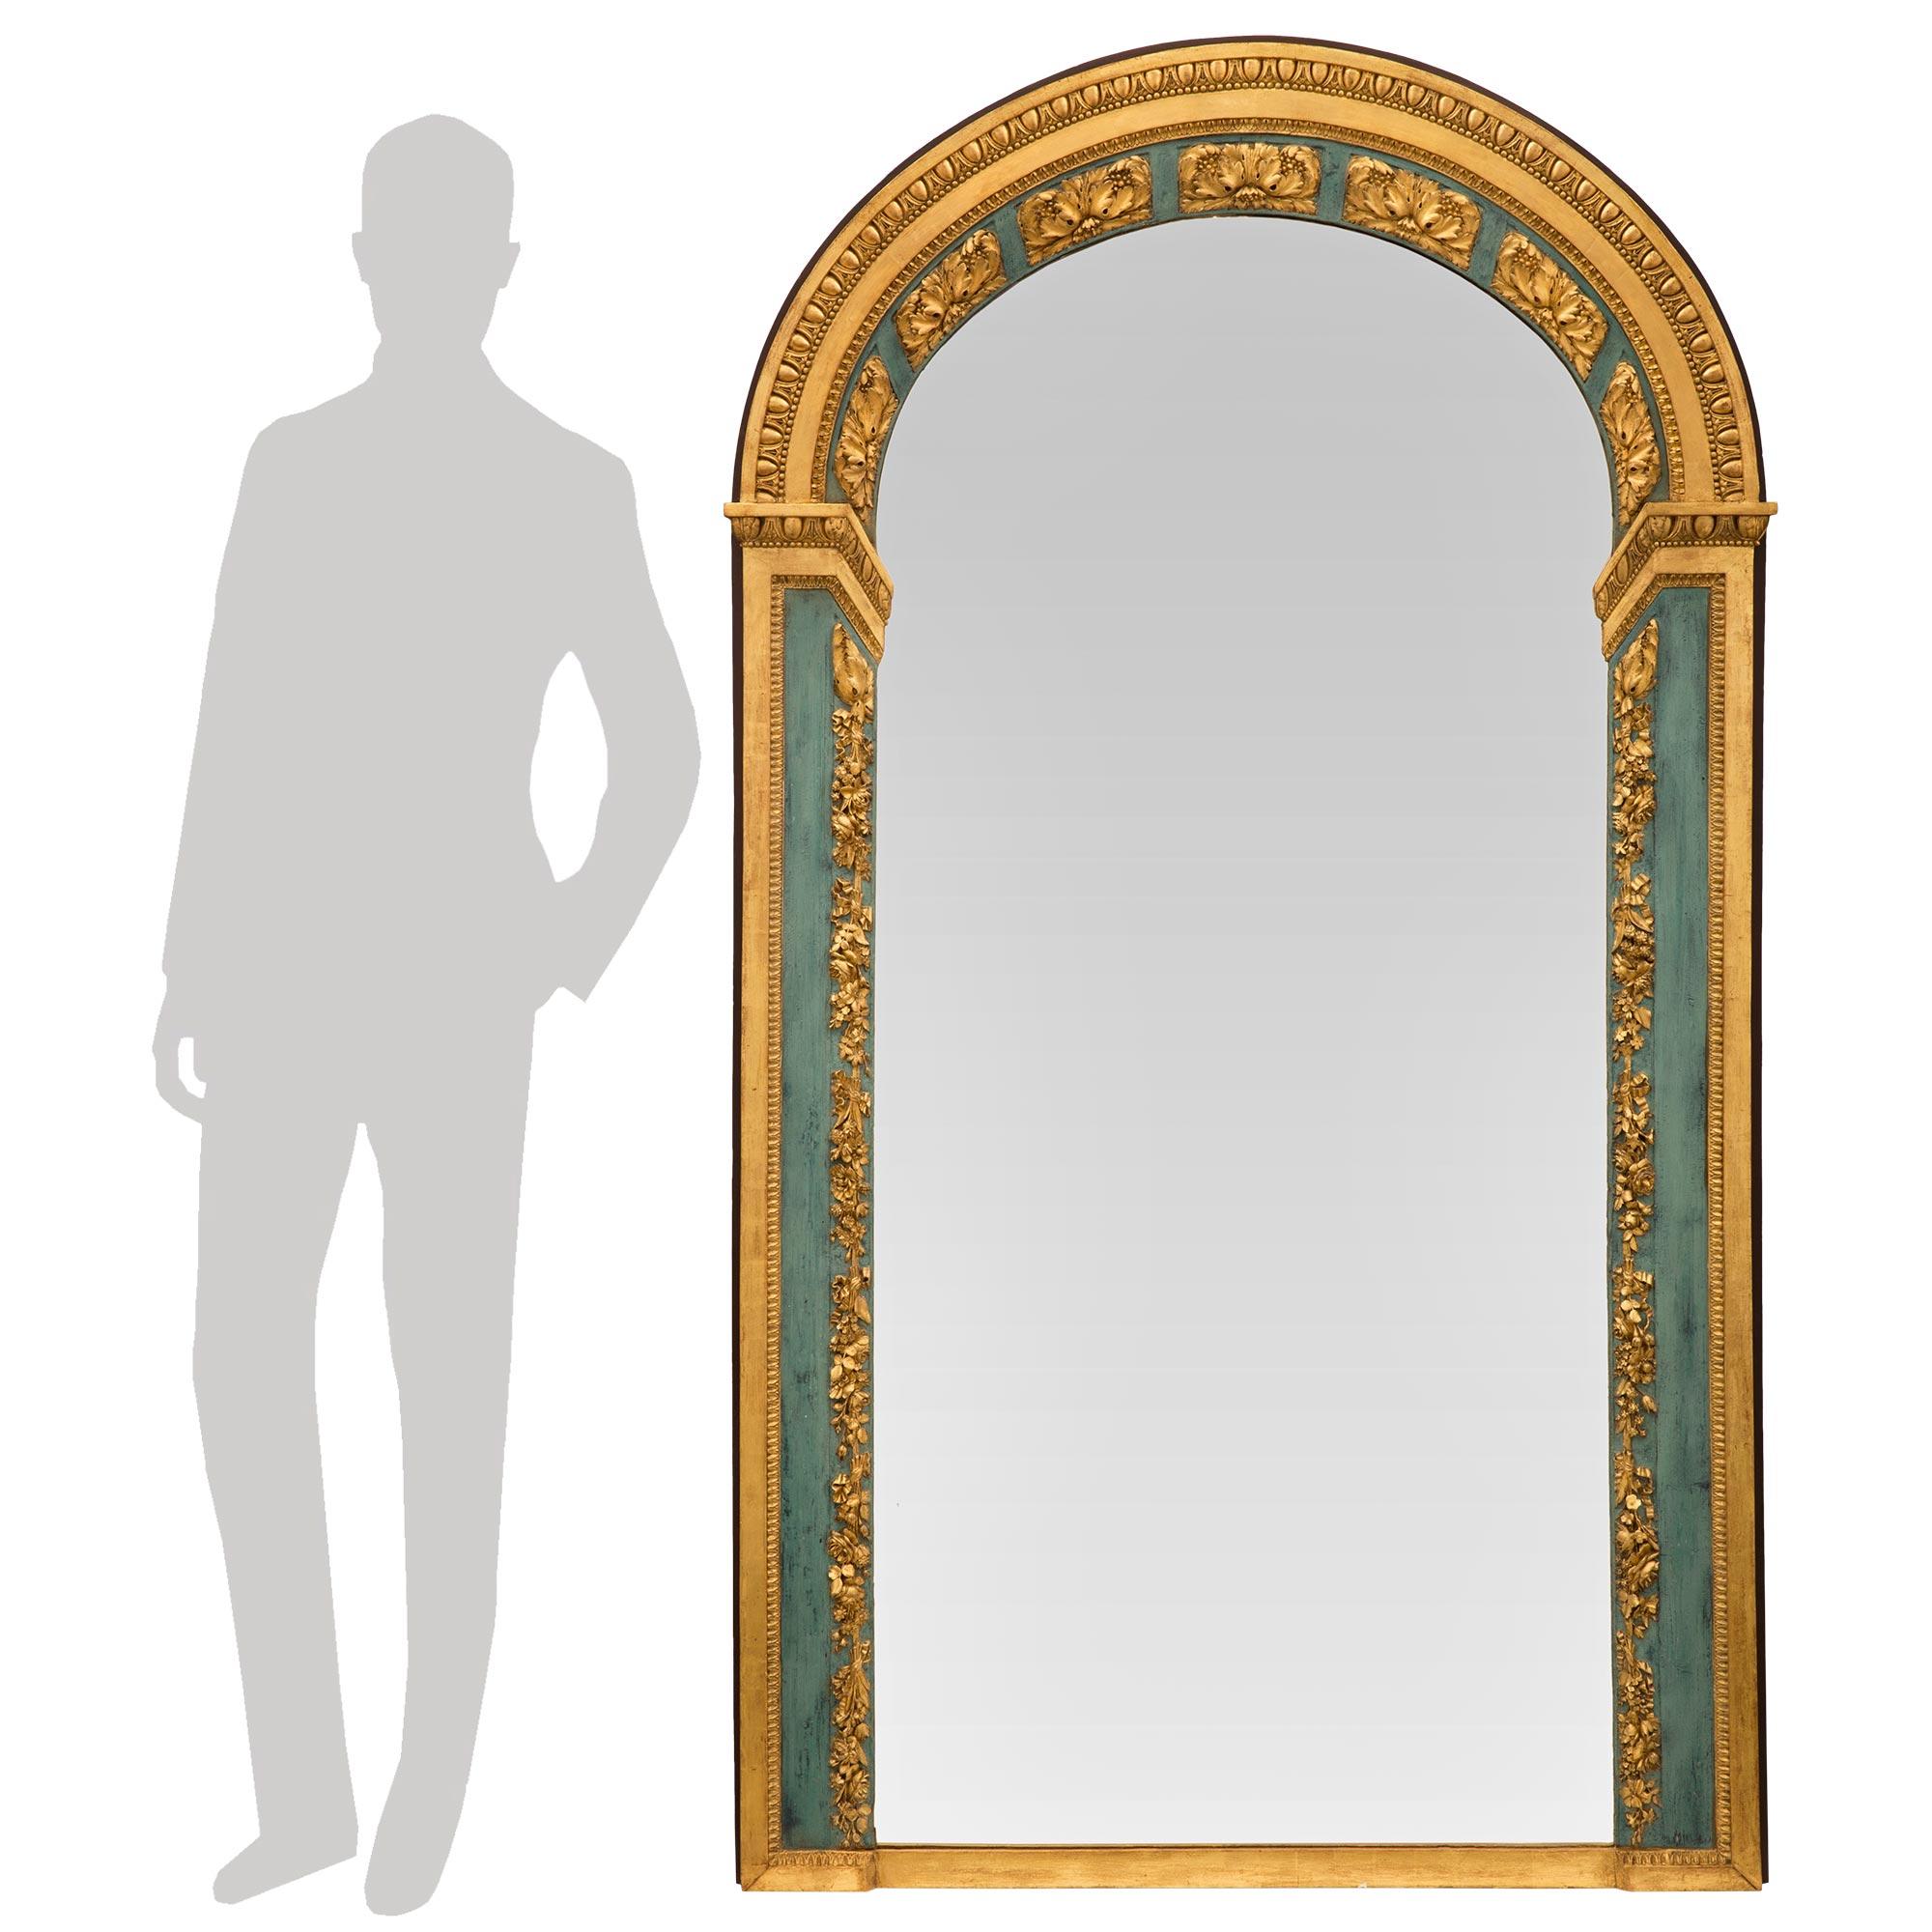 An exceptional and incredibly unique Italian 19th century Louis XVI st. patinated and giltwood mirror. The mirror retains its original mirror plate set within a most decorative straight and arched shaped frame. The frame displays a superb array of